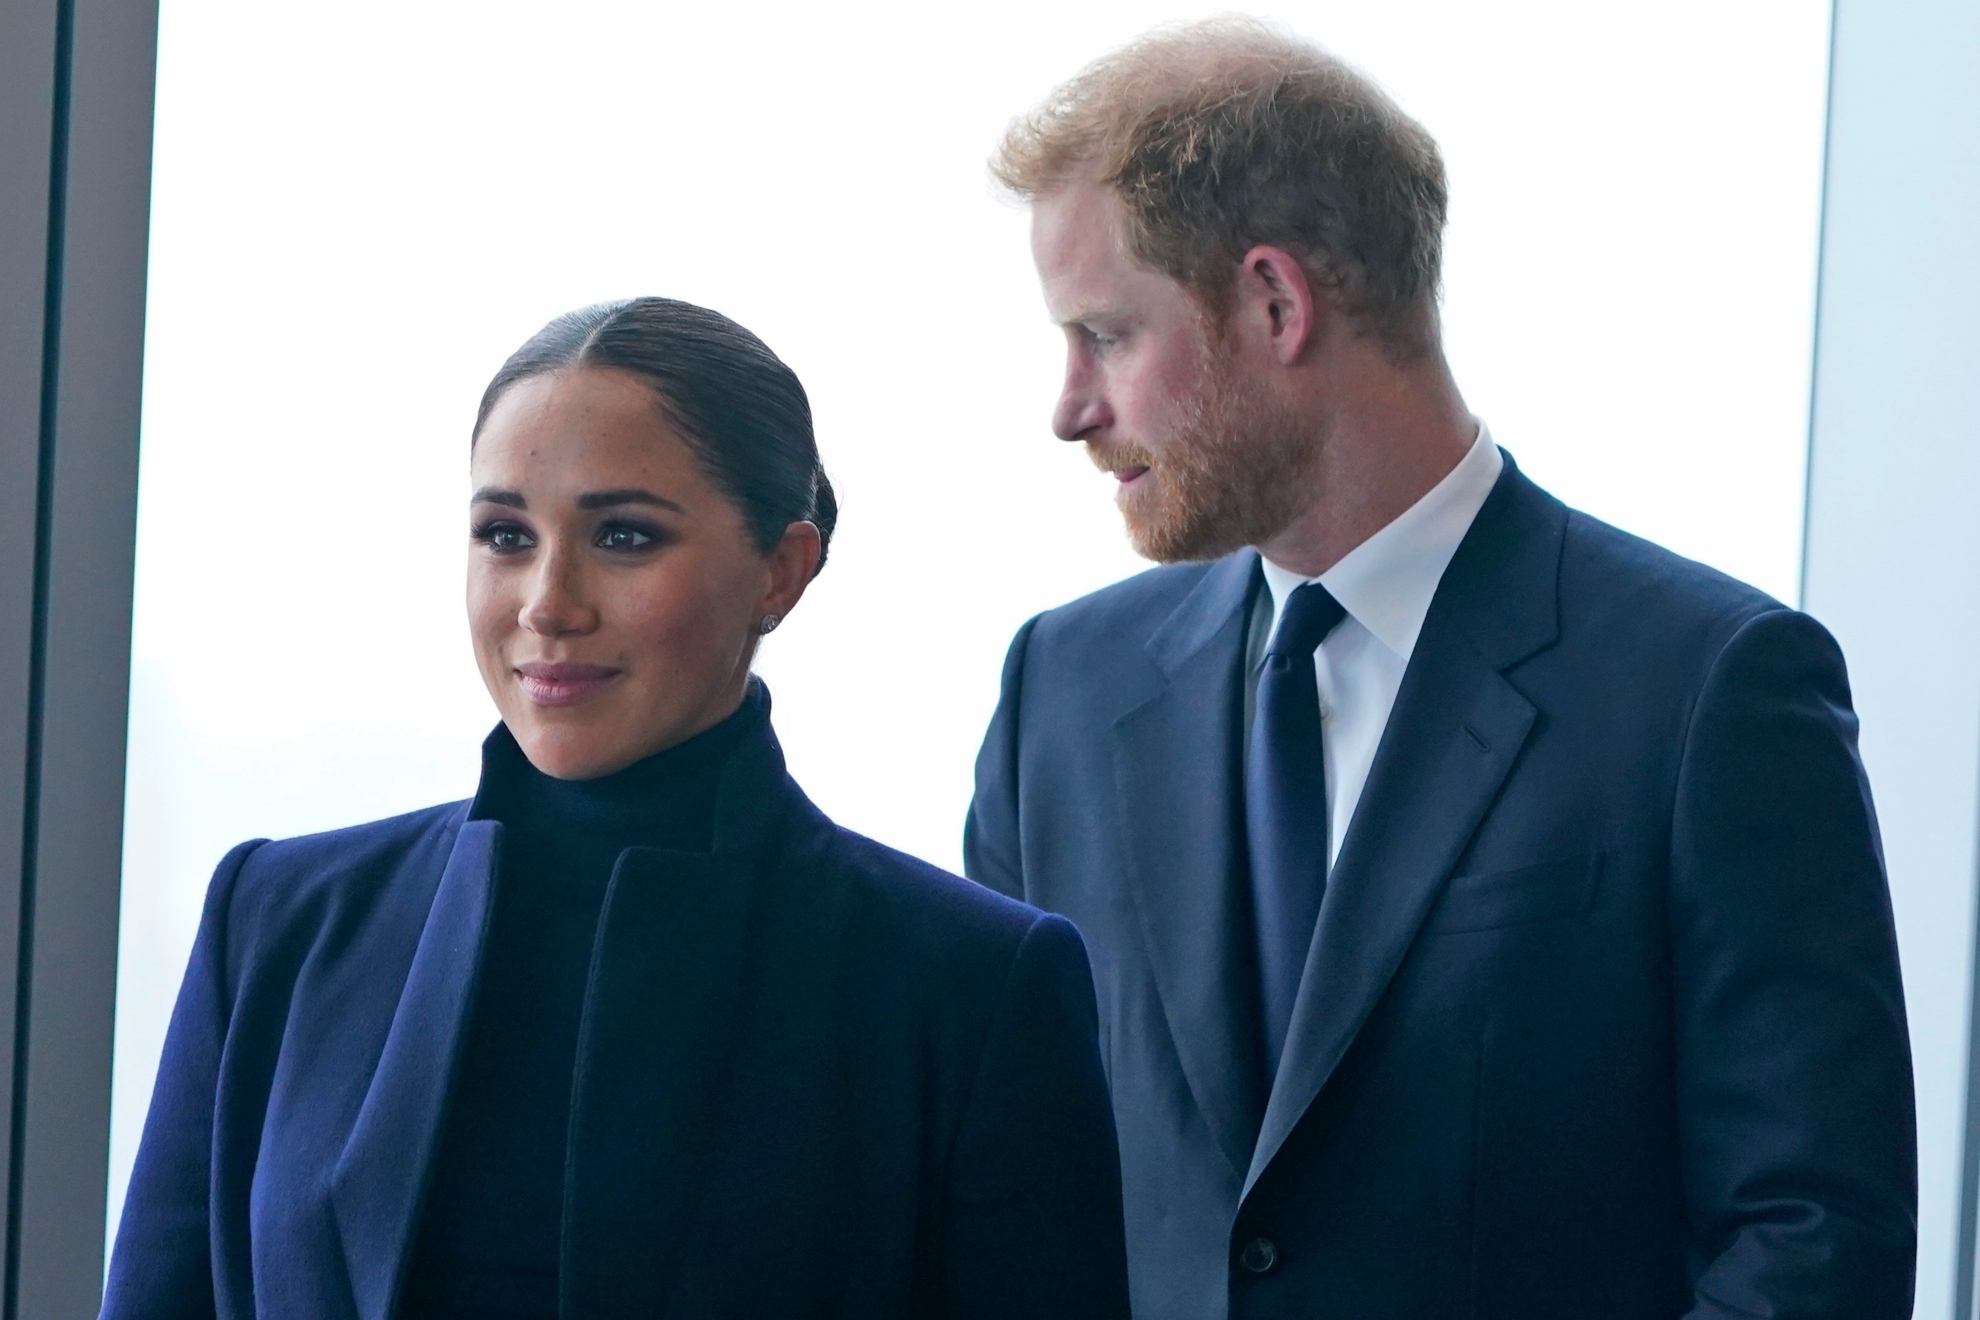 Prince Harry and Meghan Markle set their sights on creating a lifestyle brand that competes with the Beckhams